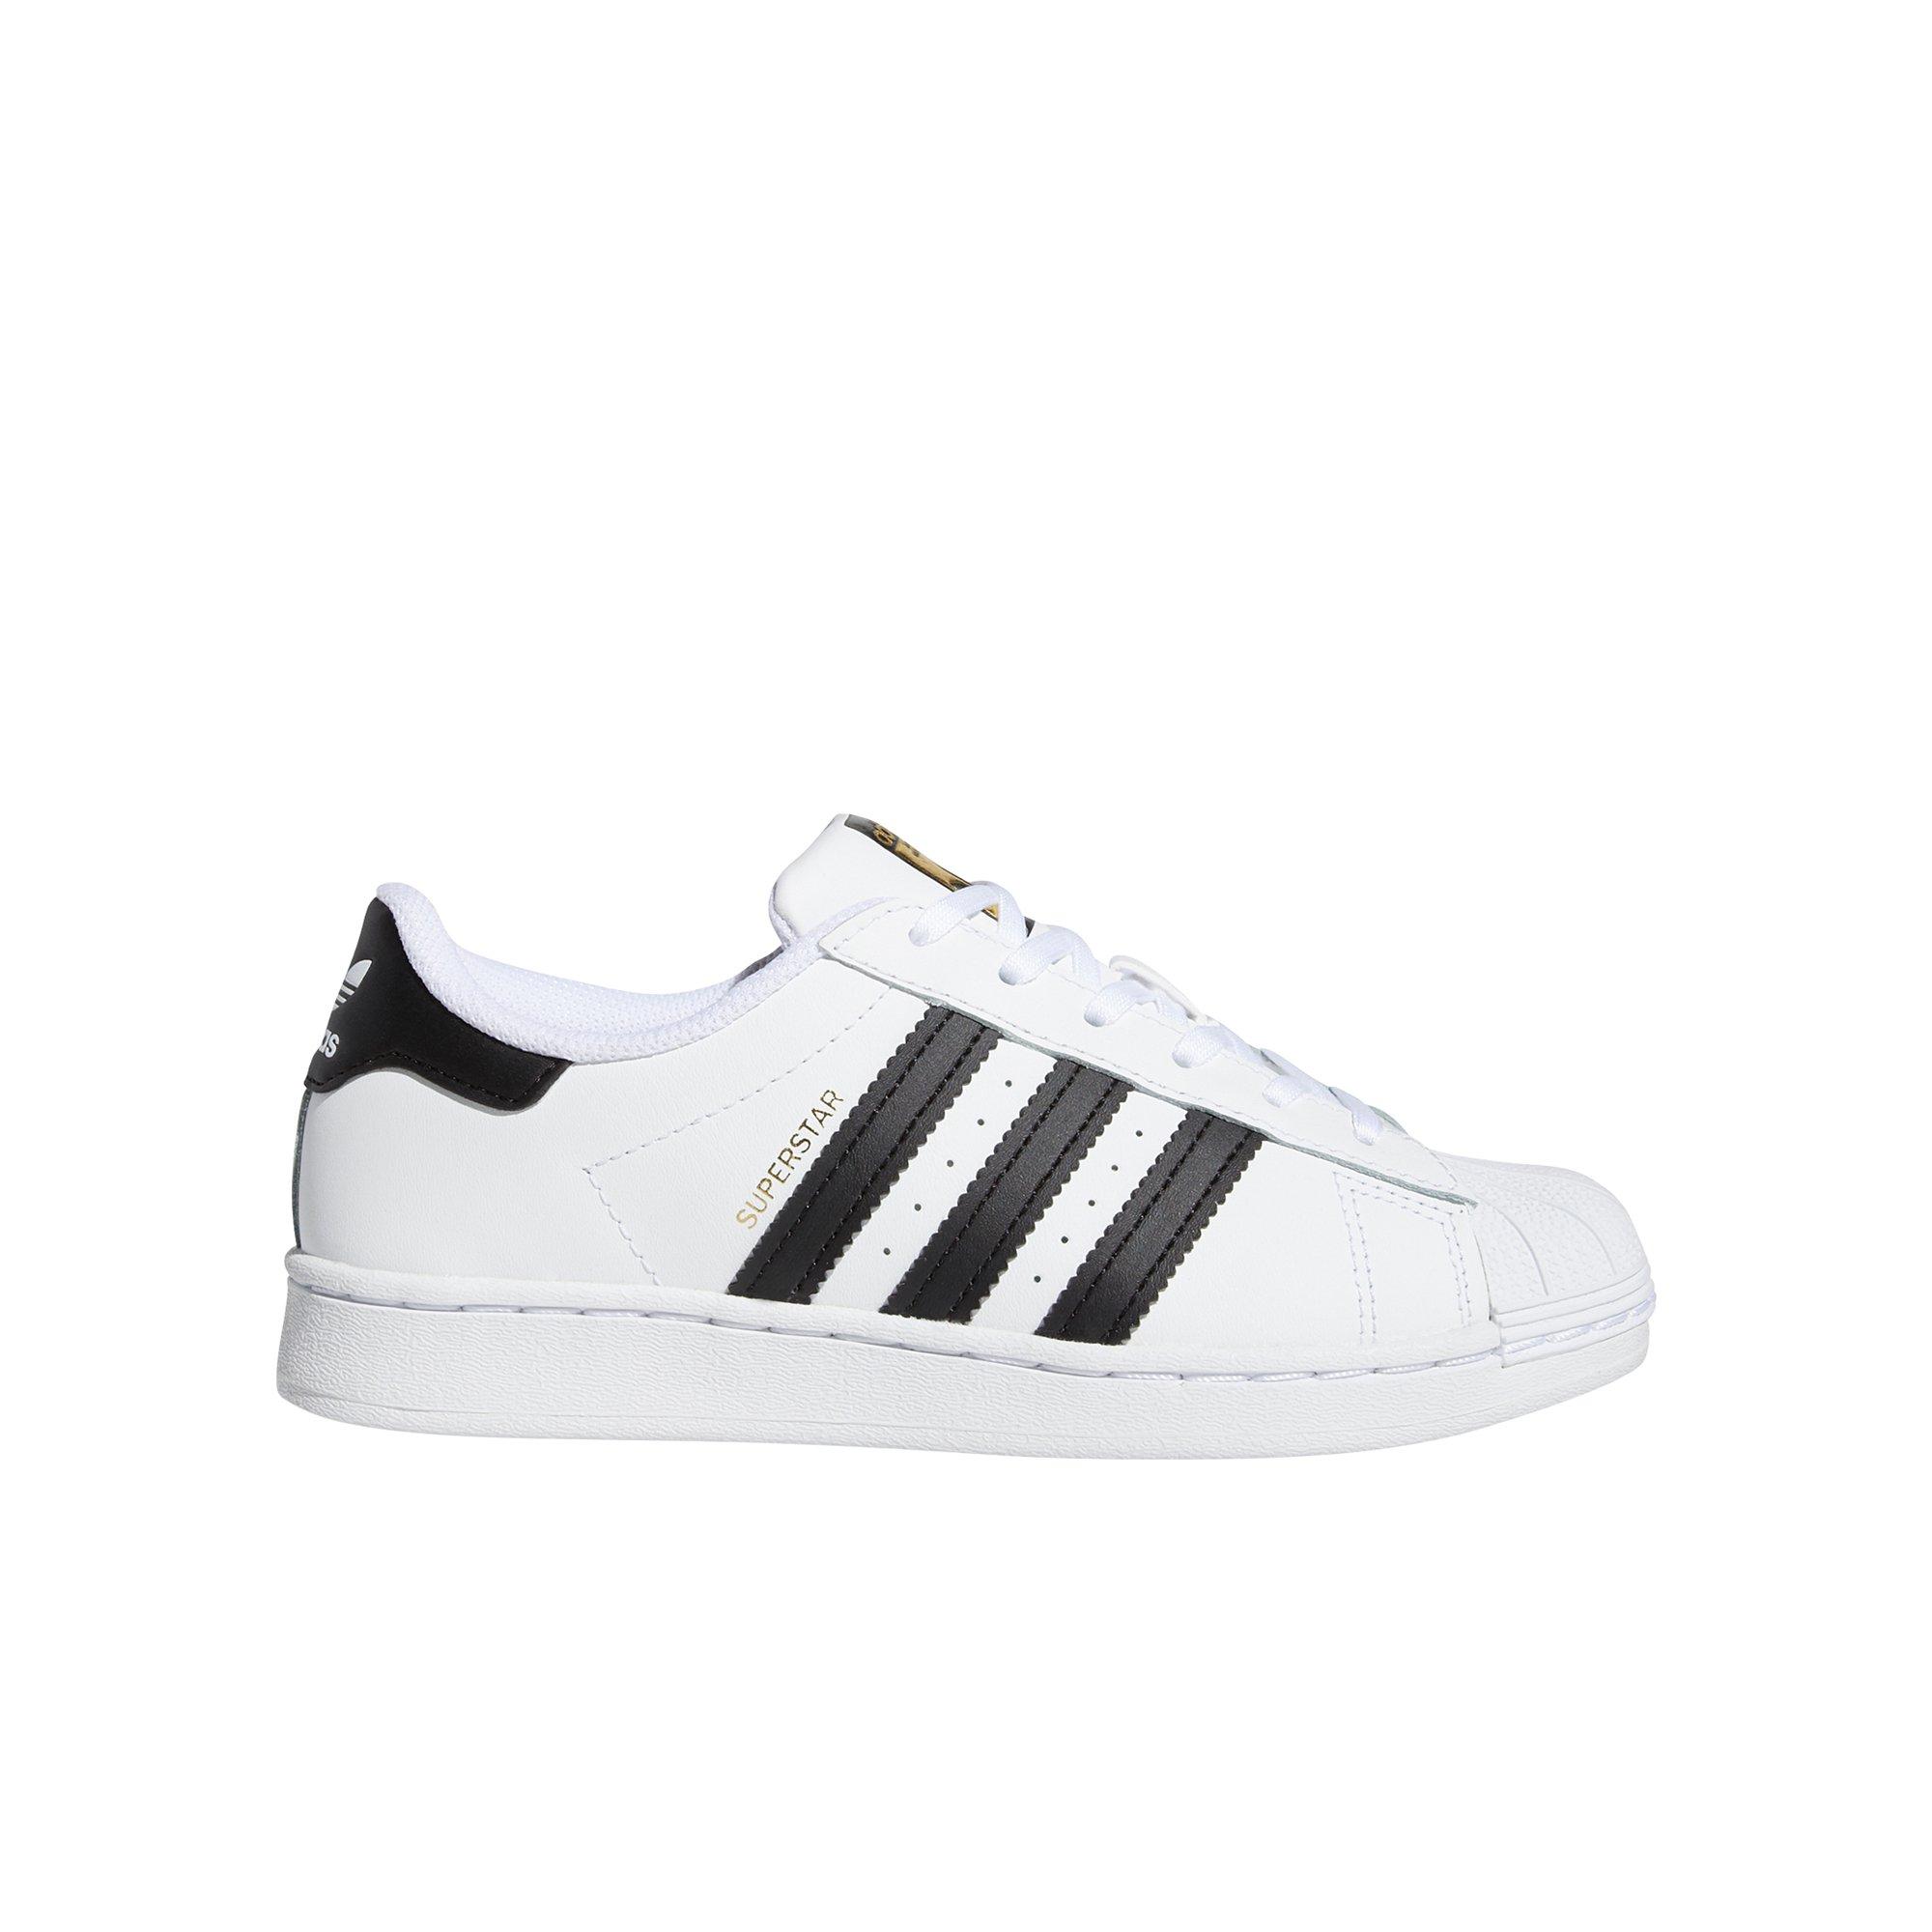 Adidas Originals Superstar Sneakers In Black And White | lupon.gov.ph